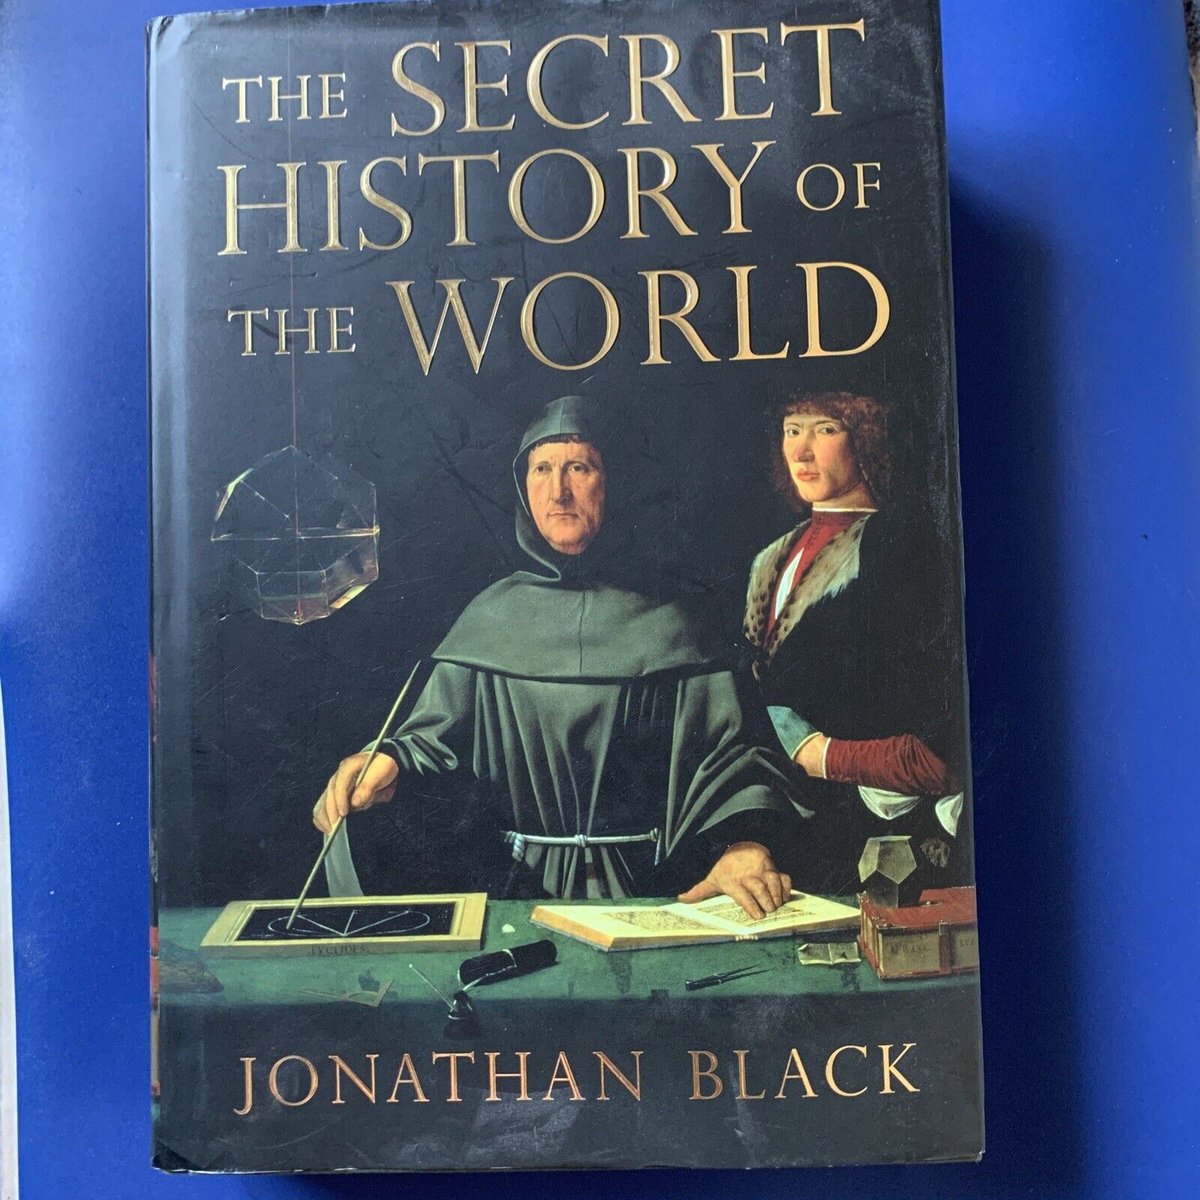 This book is a fascinating explanation of secret history for those with eyes to see and ears to hear. An indispensable addition for anyone intelligent enough to understand that history depends on who's telling the story, and always has a slant to it: amazon.com/Secret-History… #ad